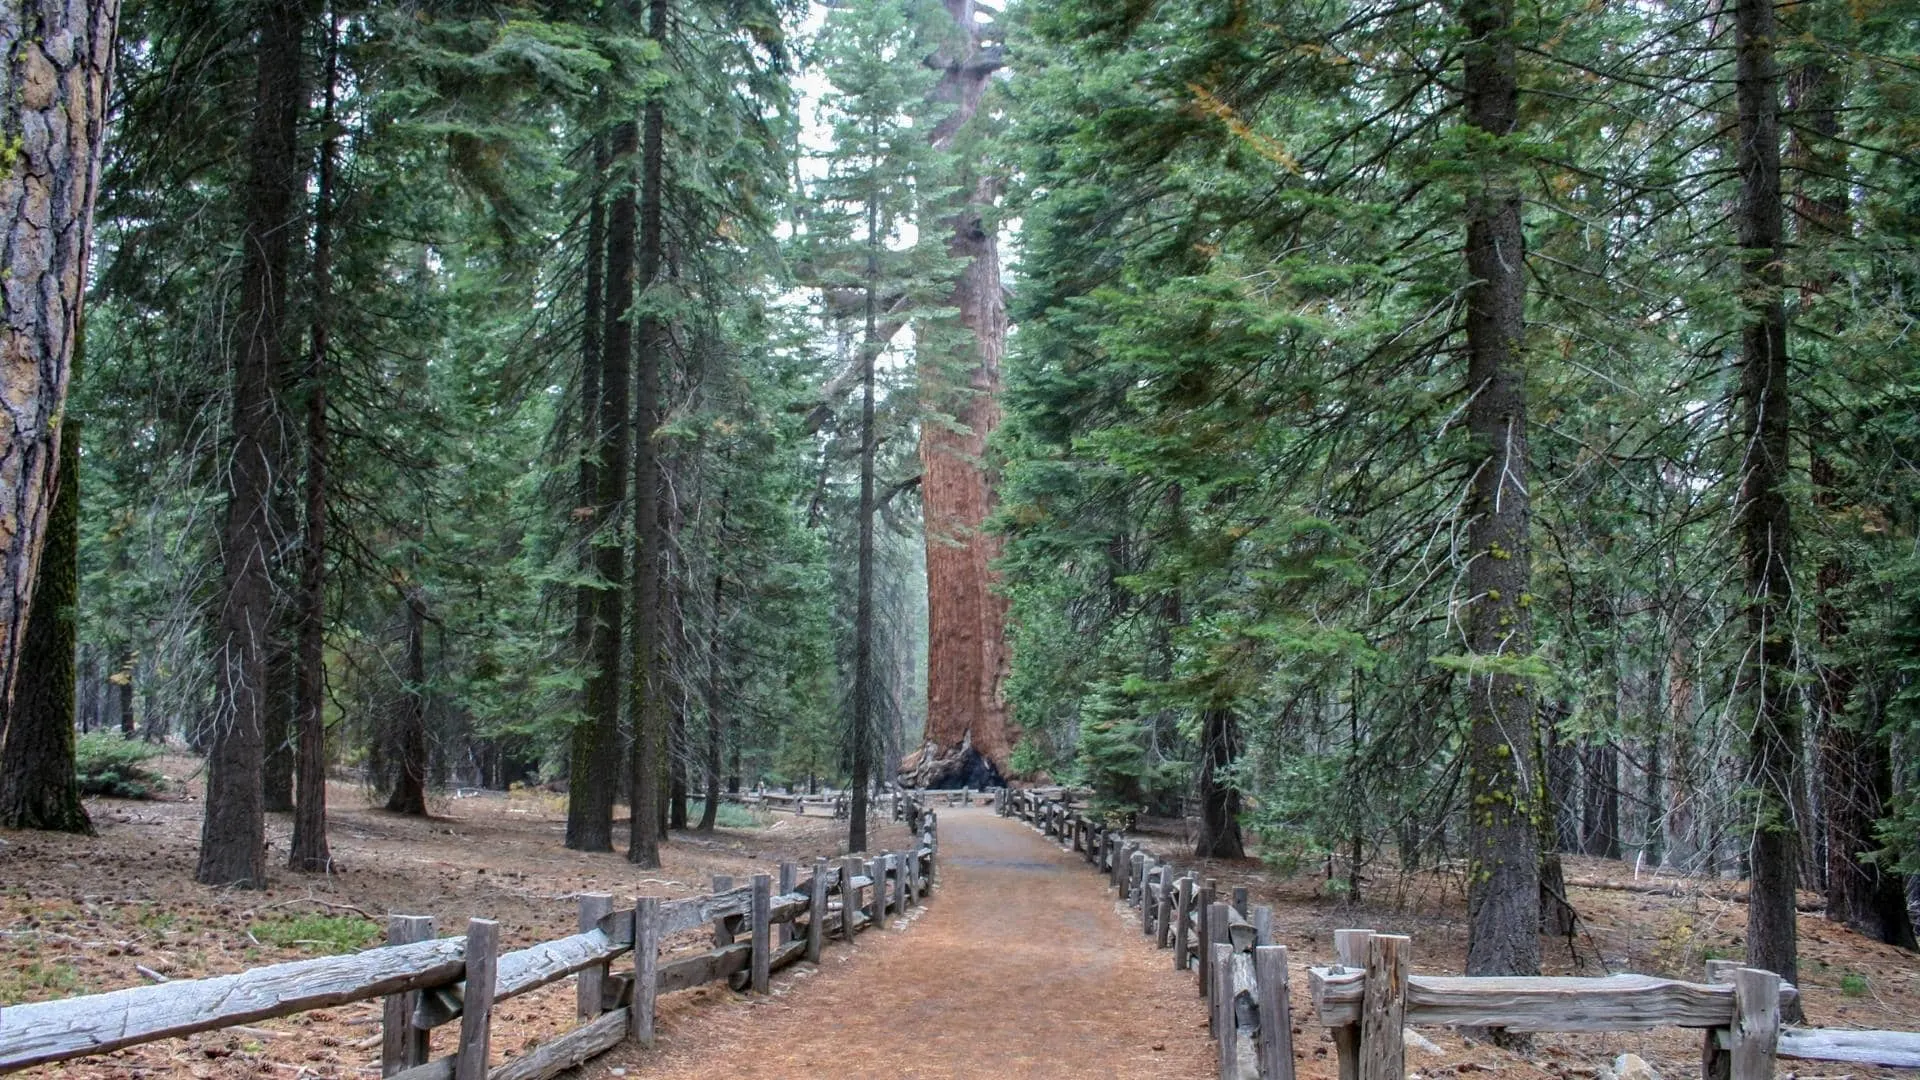 Giant Sequoia trees in the Mariposa Grove. Visit while Yosemite RV camping!